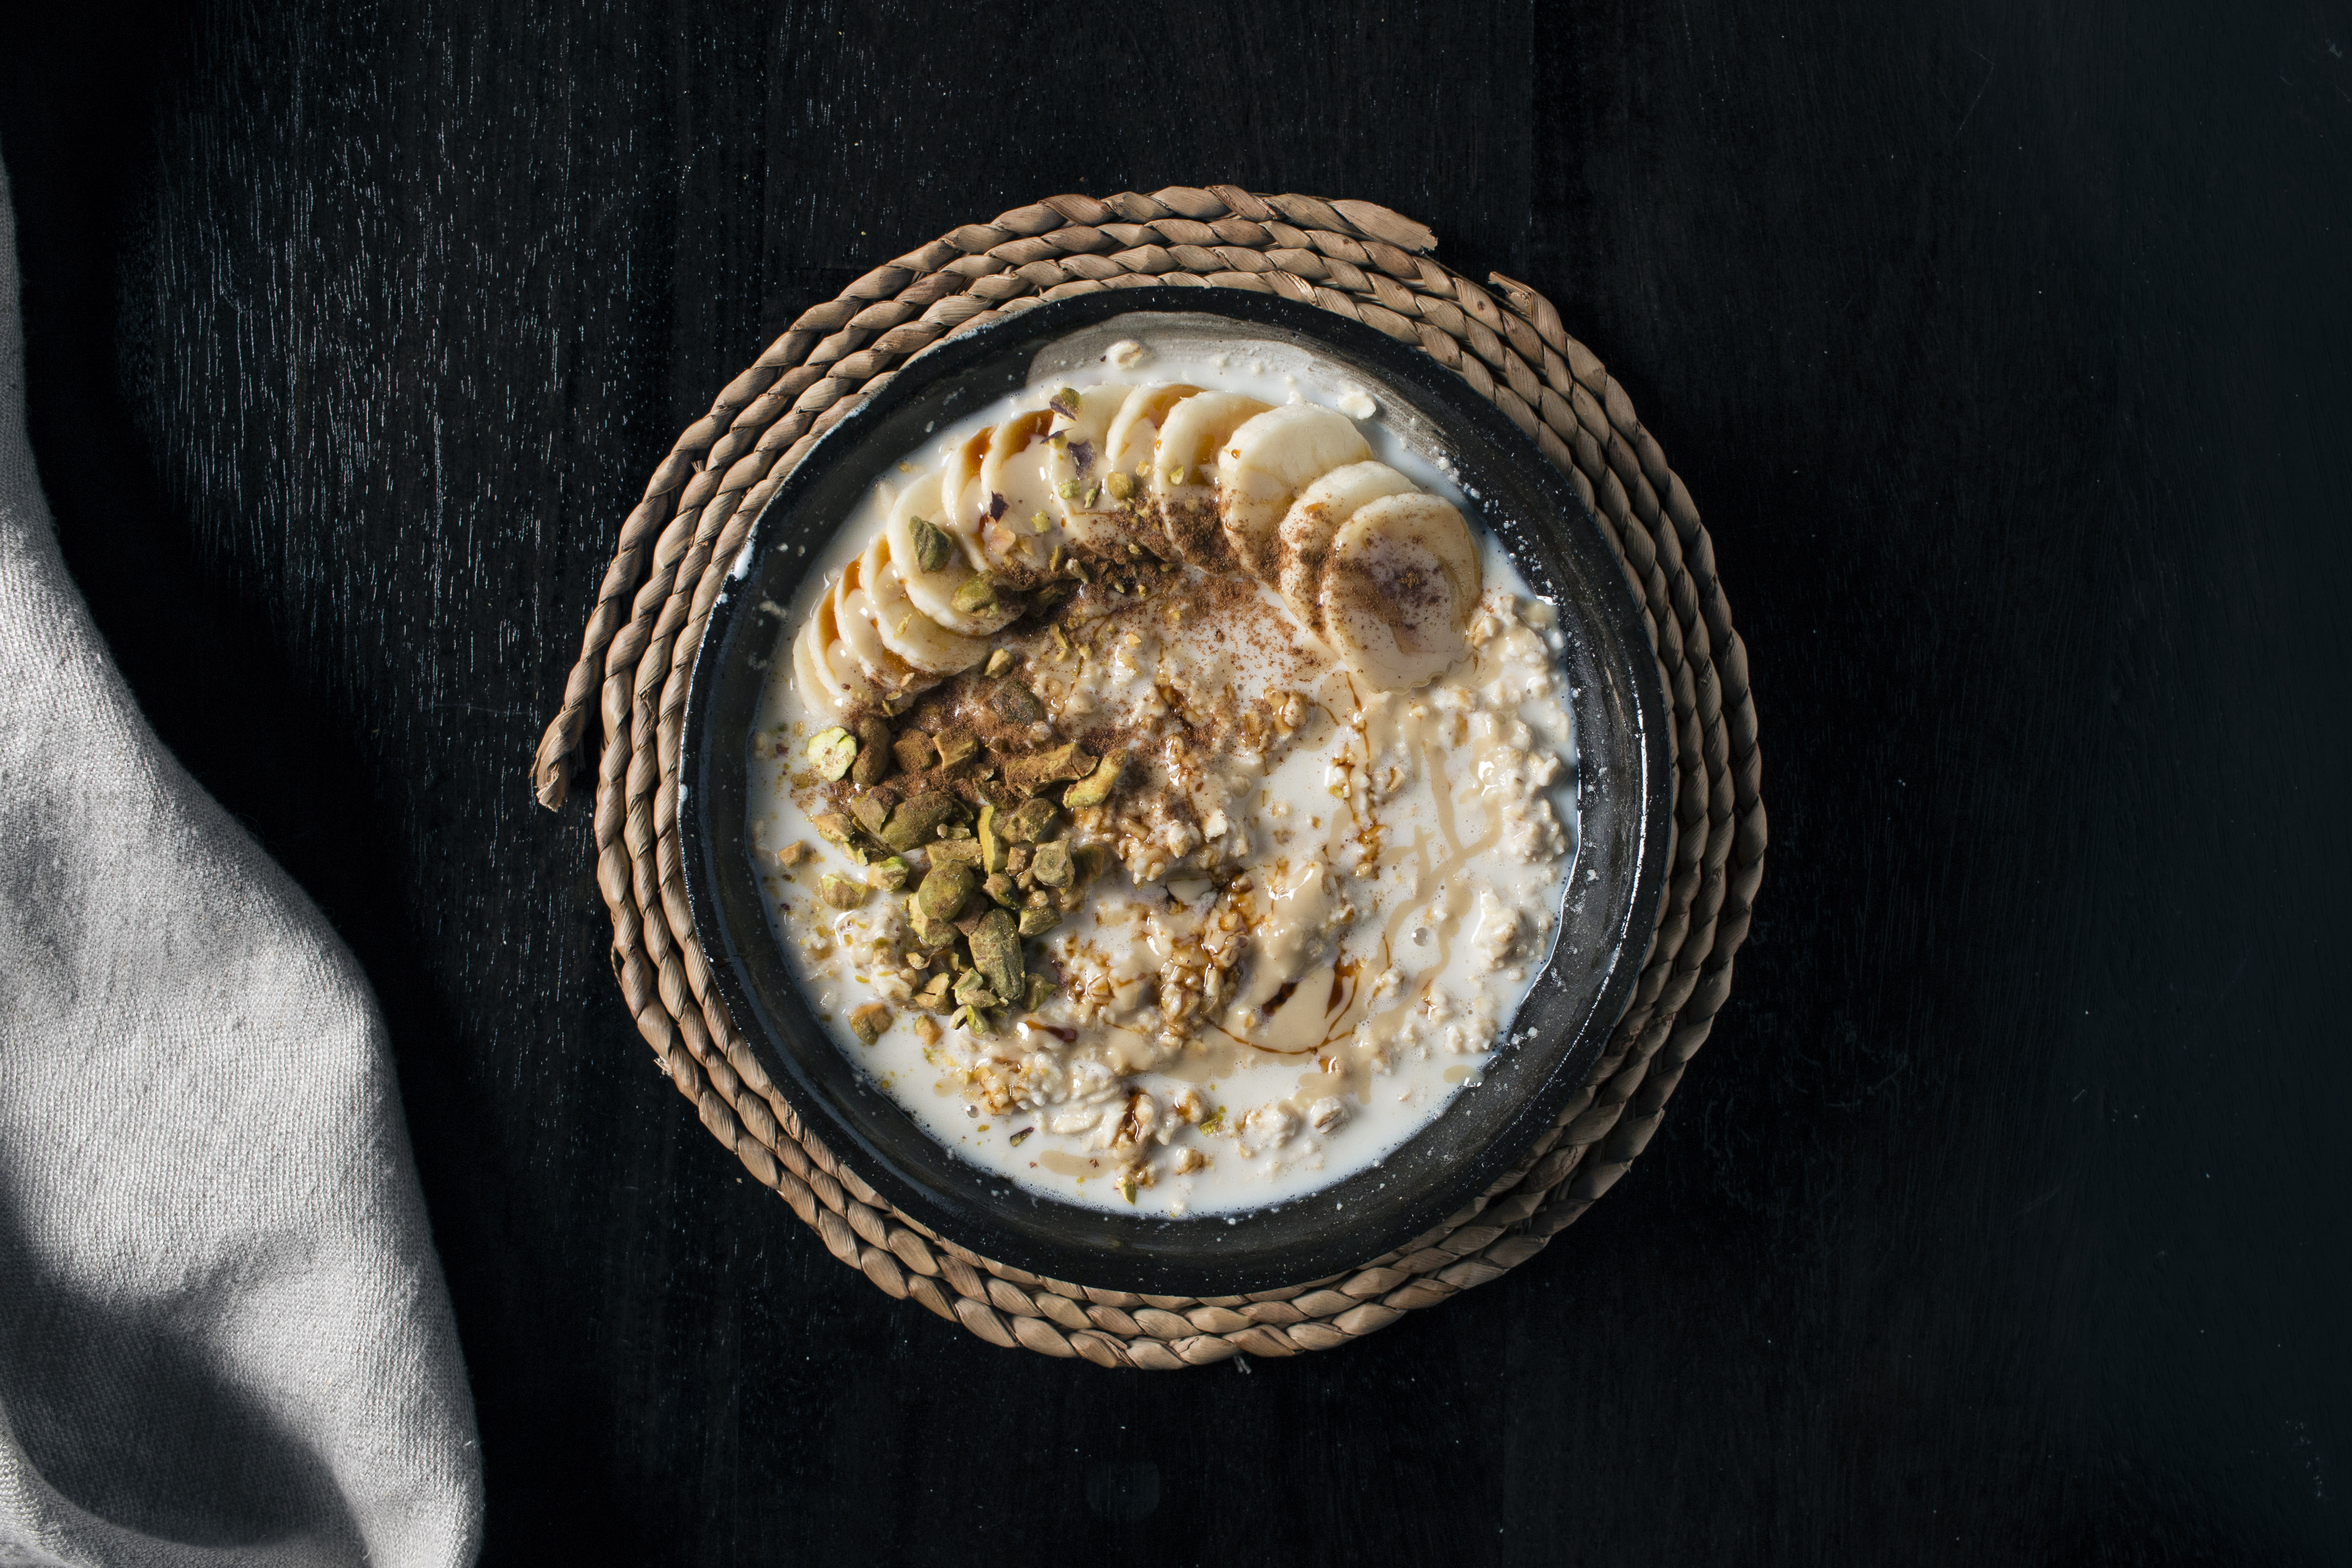 Overnight Tahini Oatmeal with Silan & Bananas | I Will Not Eat Oysters